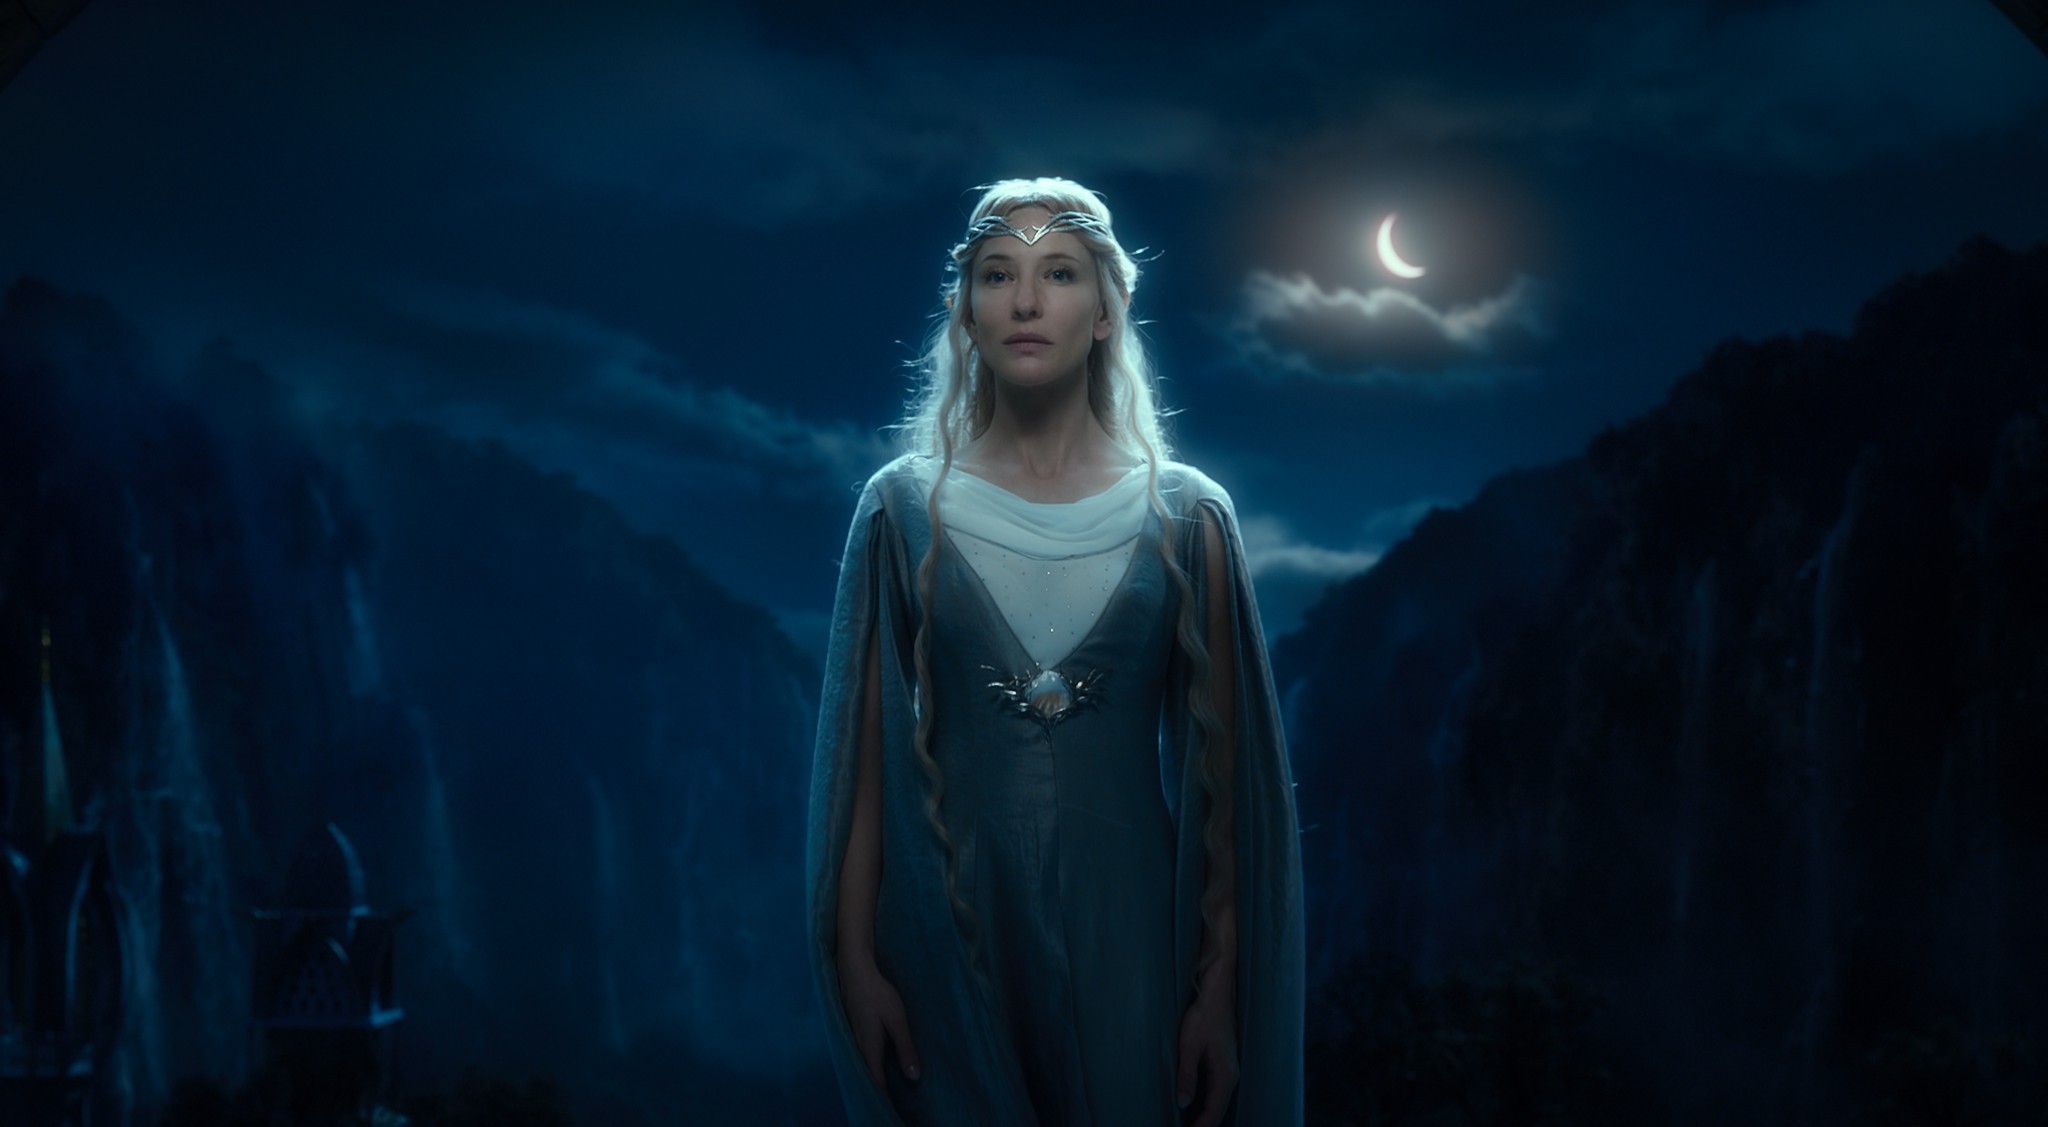 fantasy Art, The Lord Of The Rings: The Fellowship Of The Ring, Blonde, Elves, Moonlight, Galadriel, Cate Blanchett Wallpaper